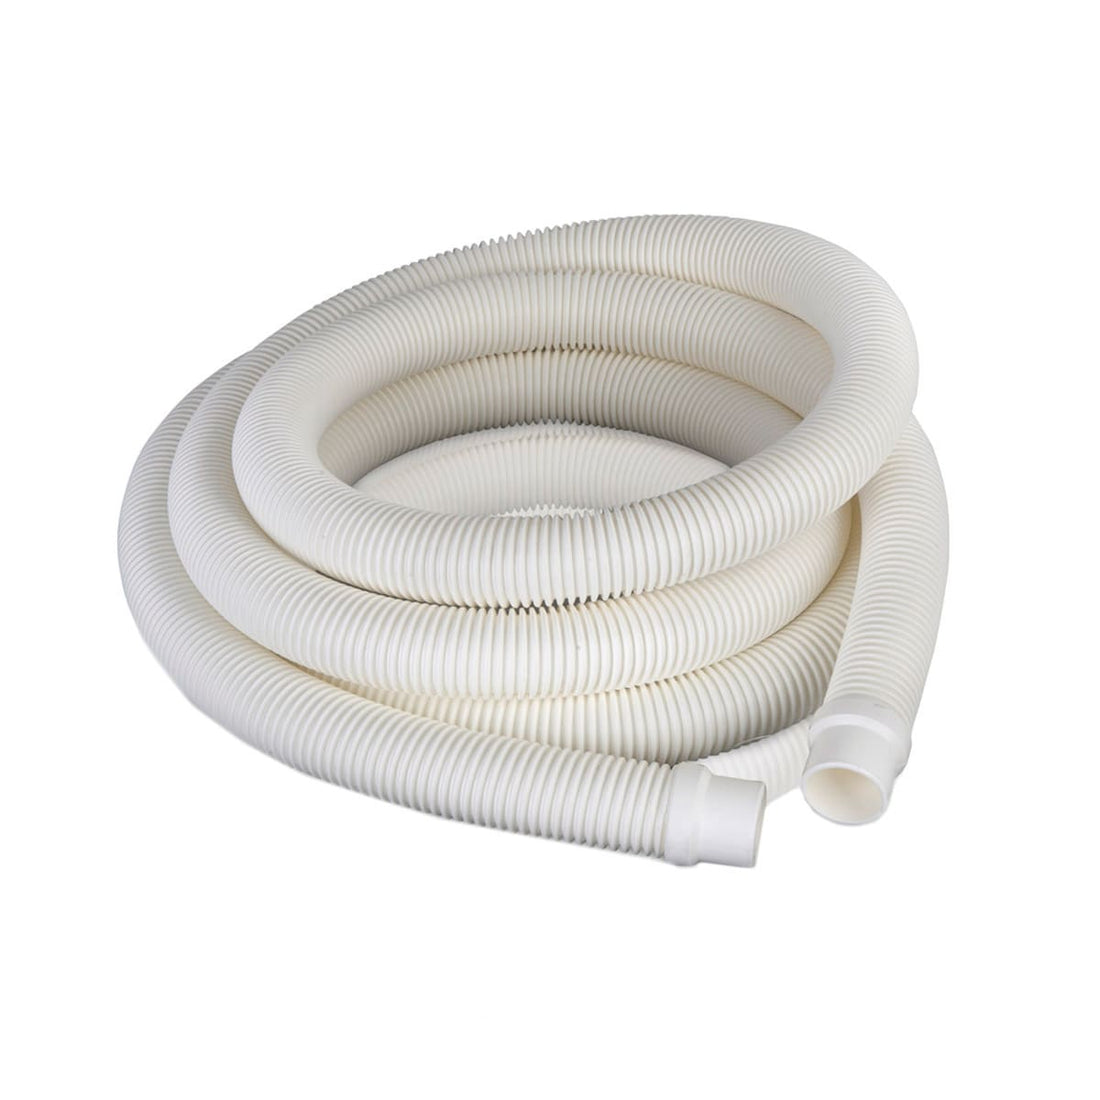 WHITE POOL FILTER HOSE 4M TWO ENDS 32MM